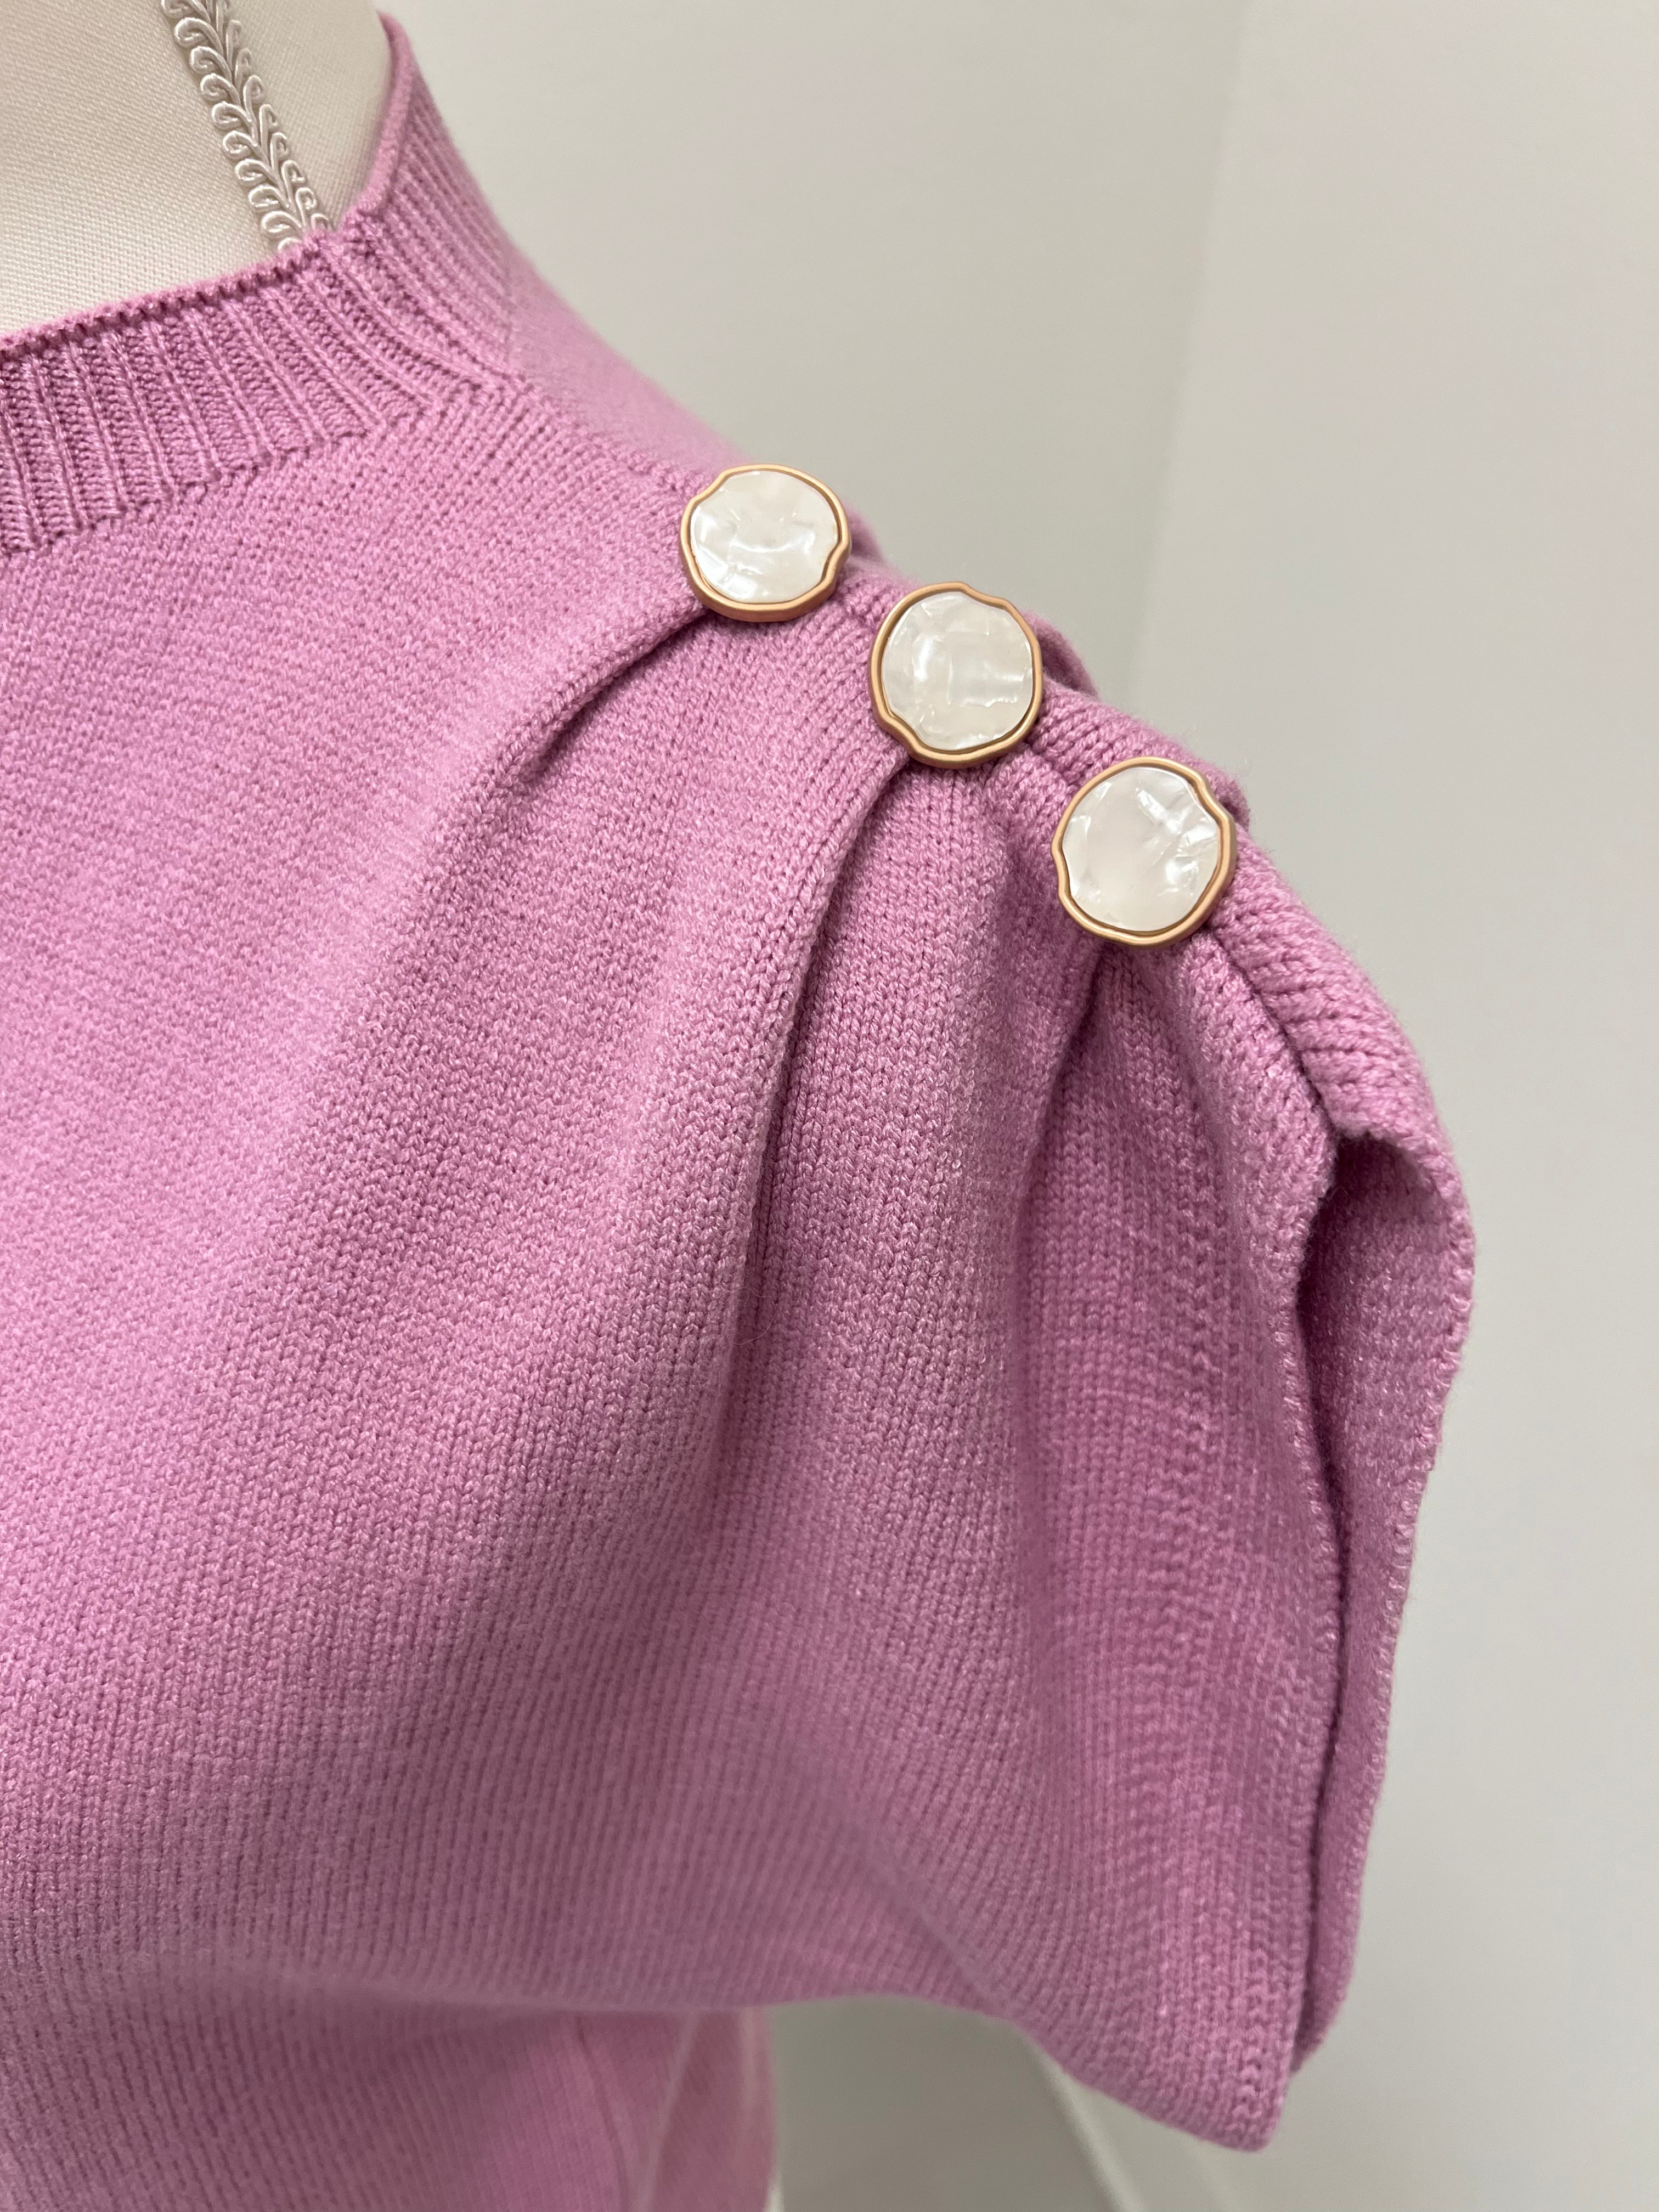 Button detail on lilac sweater sleeves